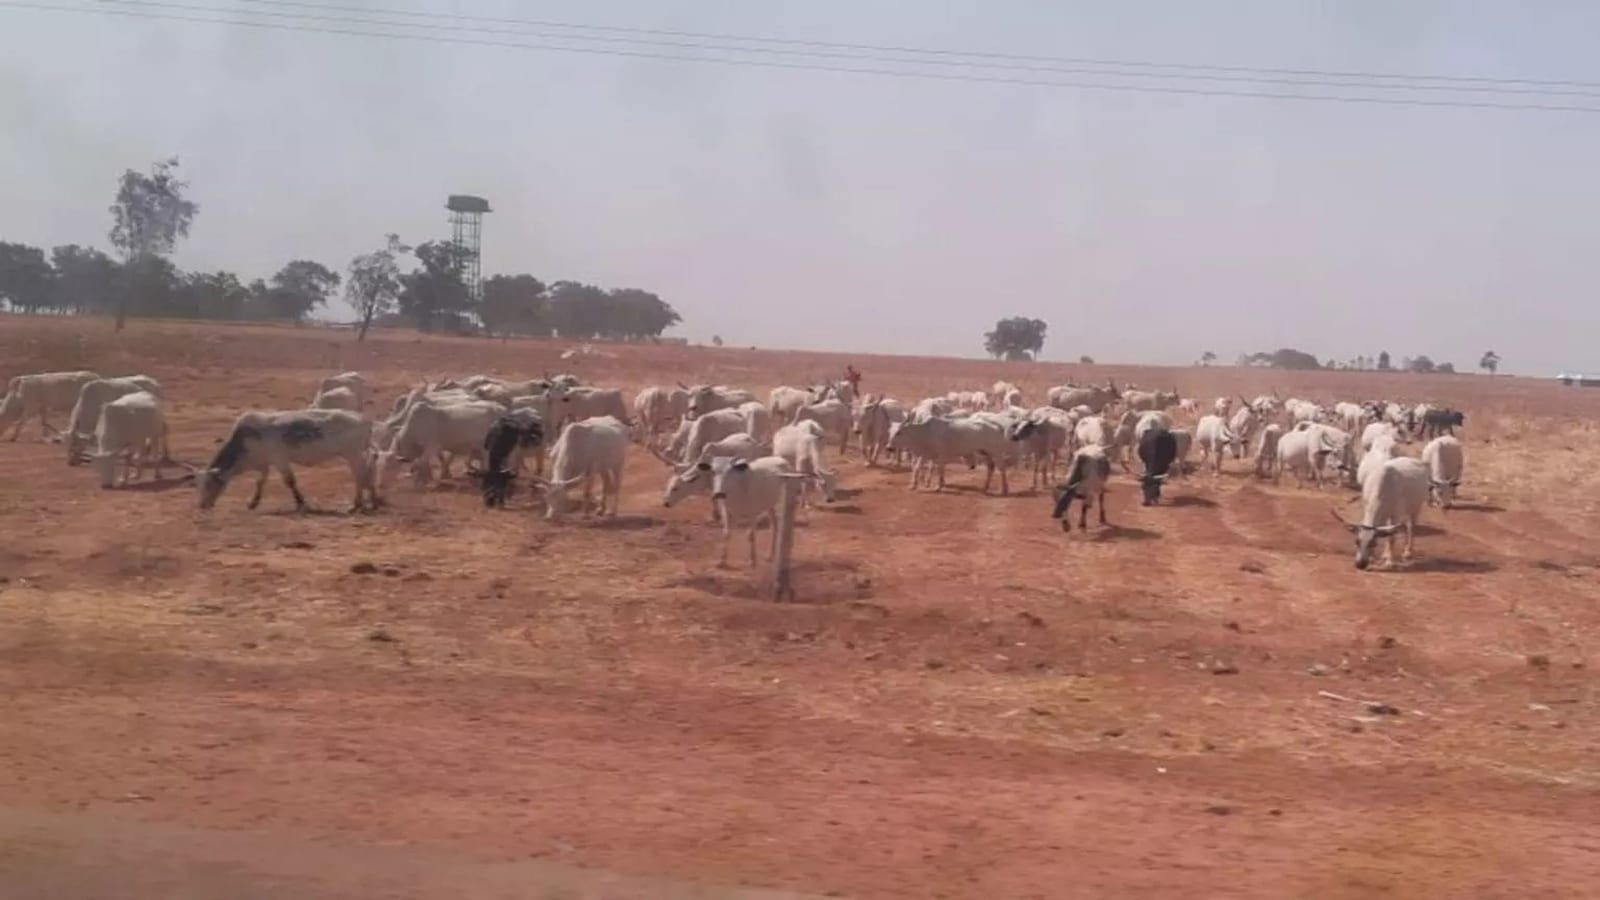 Livestock shortage causes surge in meat prices, affects local businesses in Kajiado County